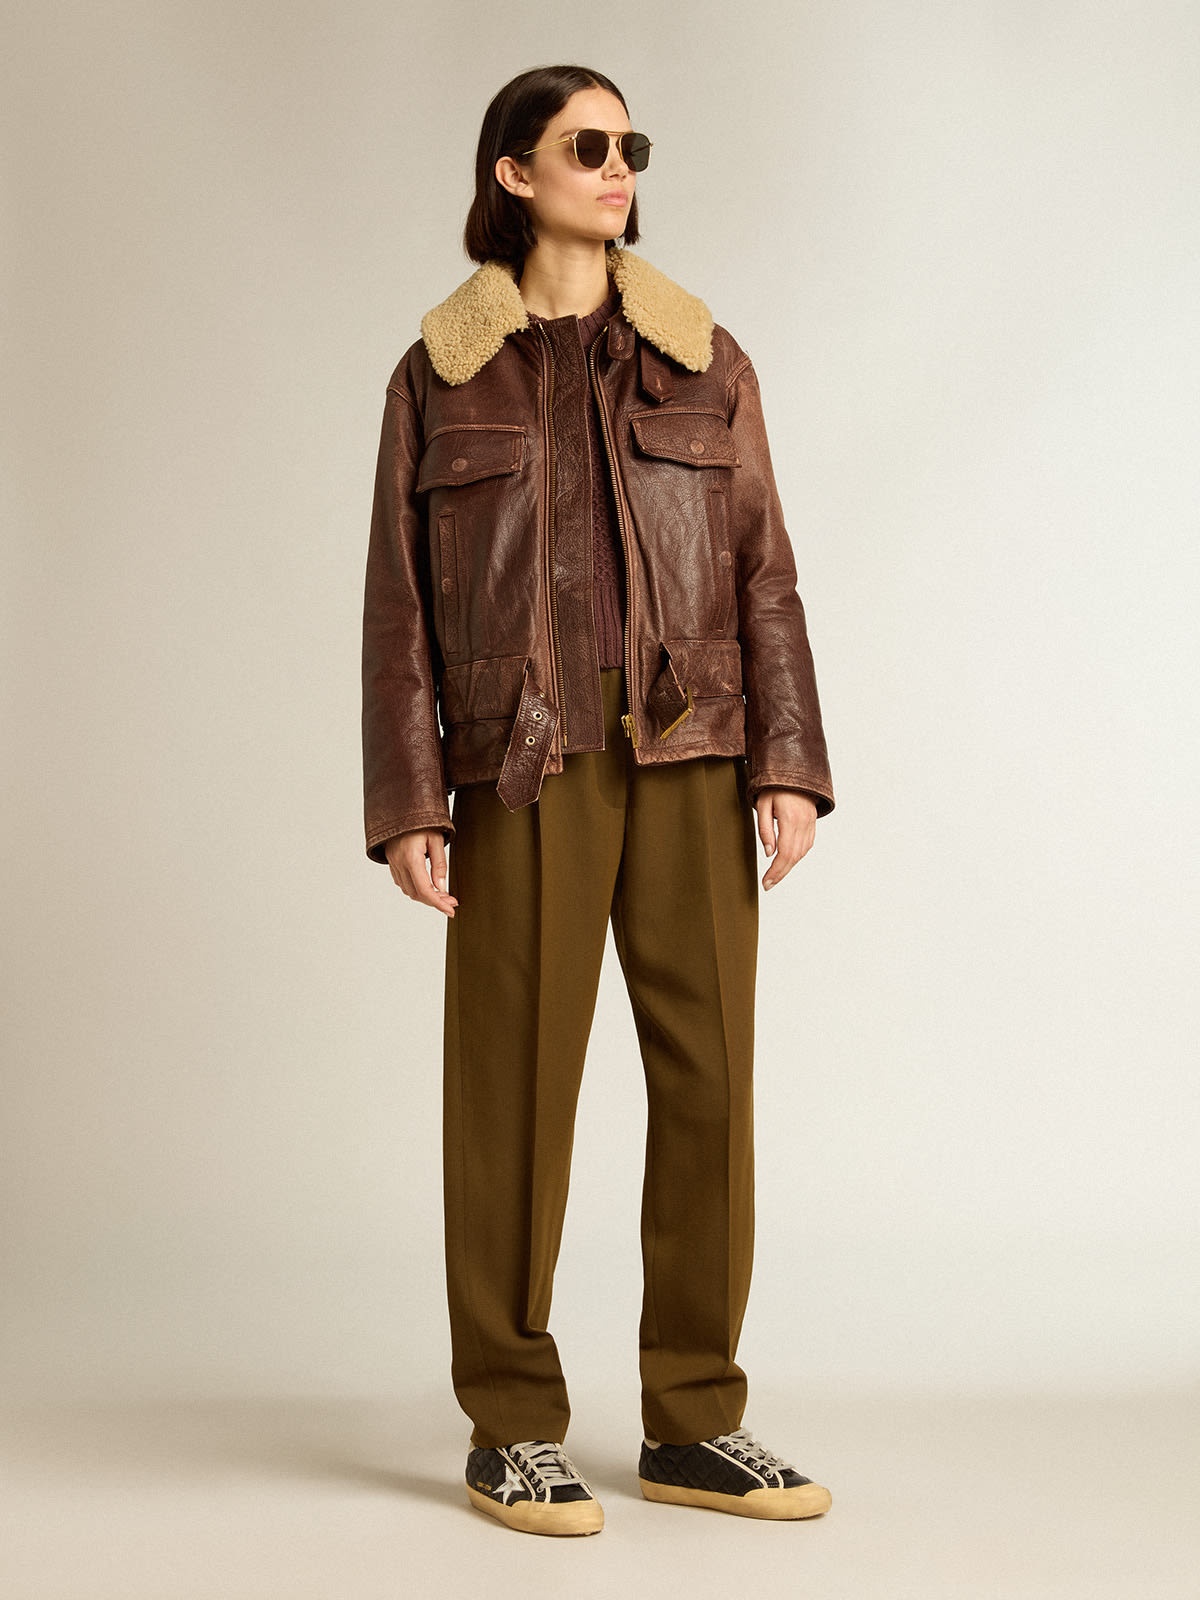 Beech-colored pants in wool and viscose blend - 3